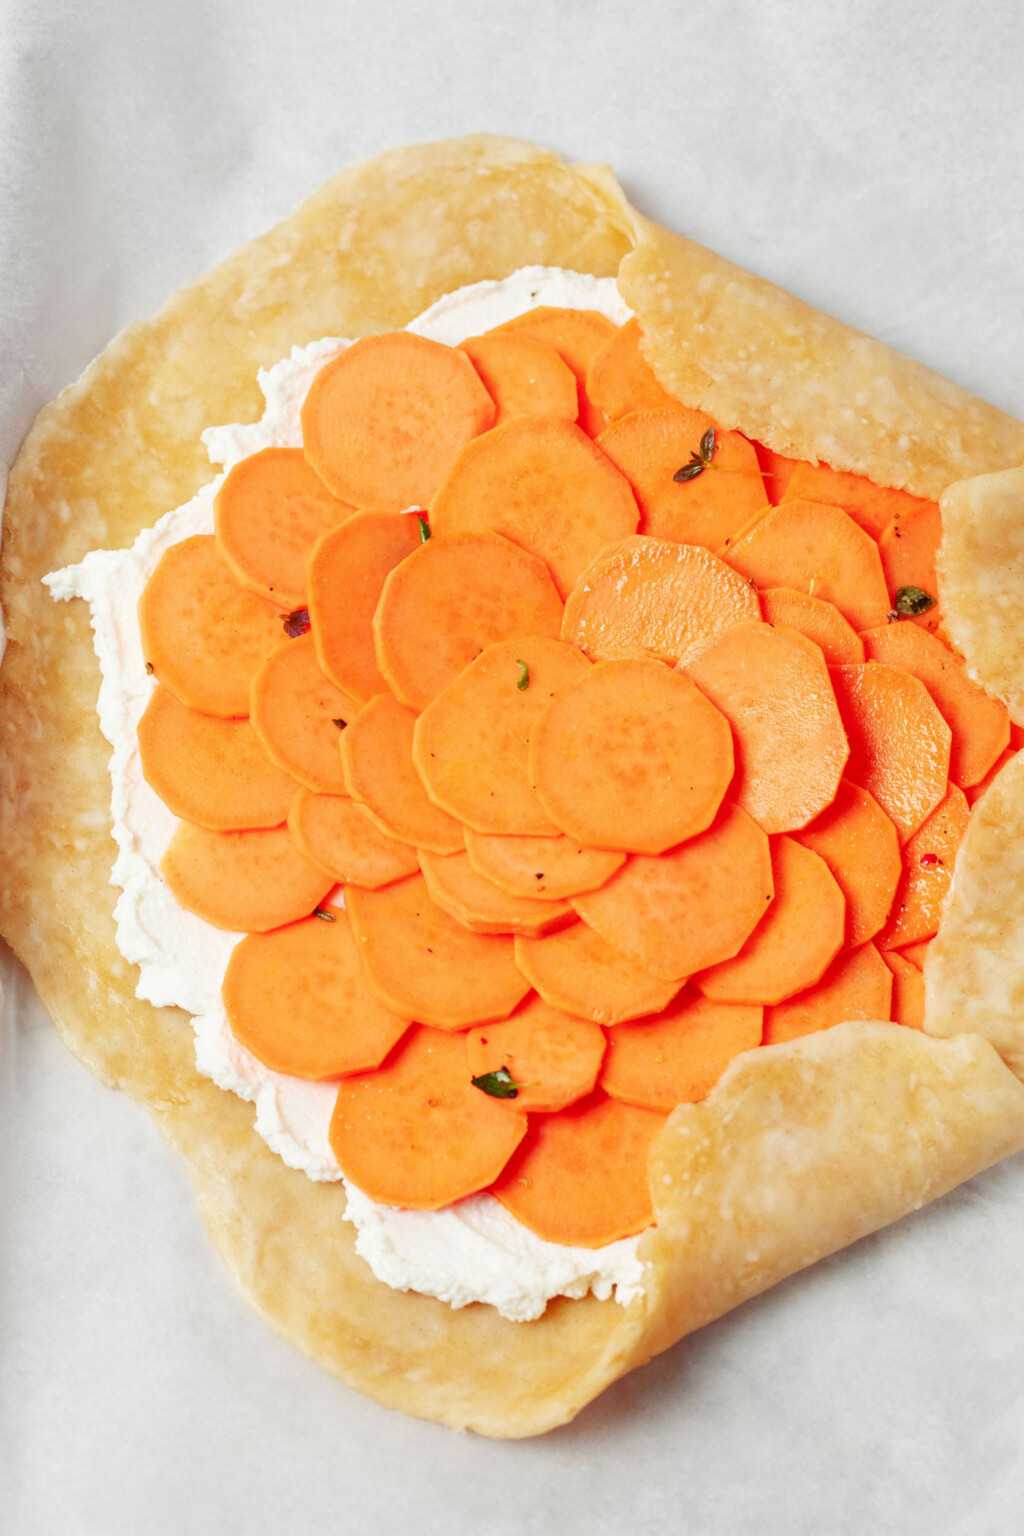 A round of vegan pastry dough is being folded over a layer of cashew cheese and thin rounds of sliced sweet potato.